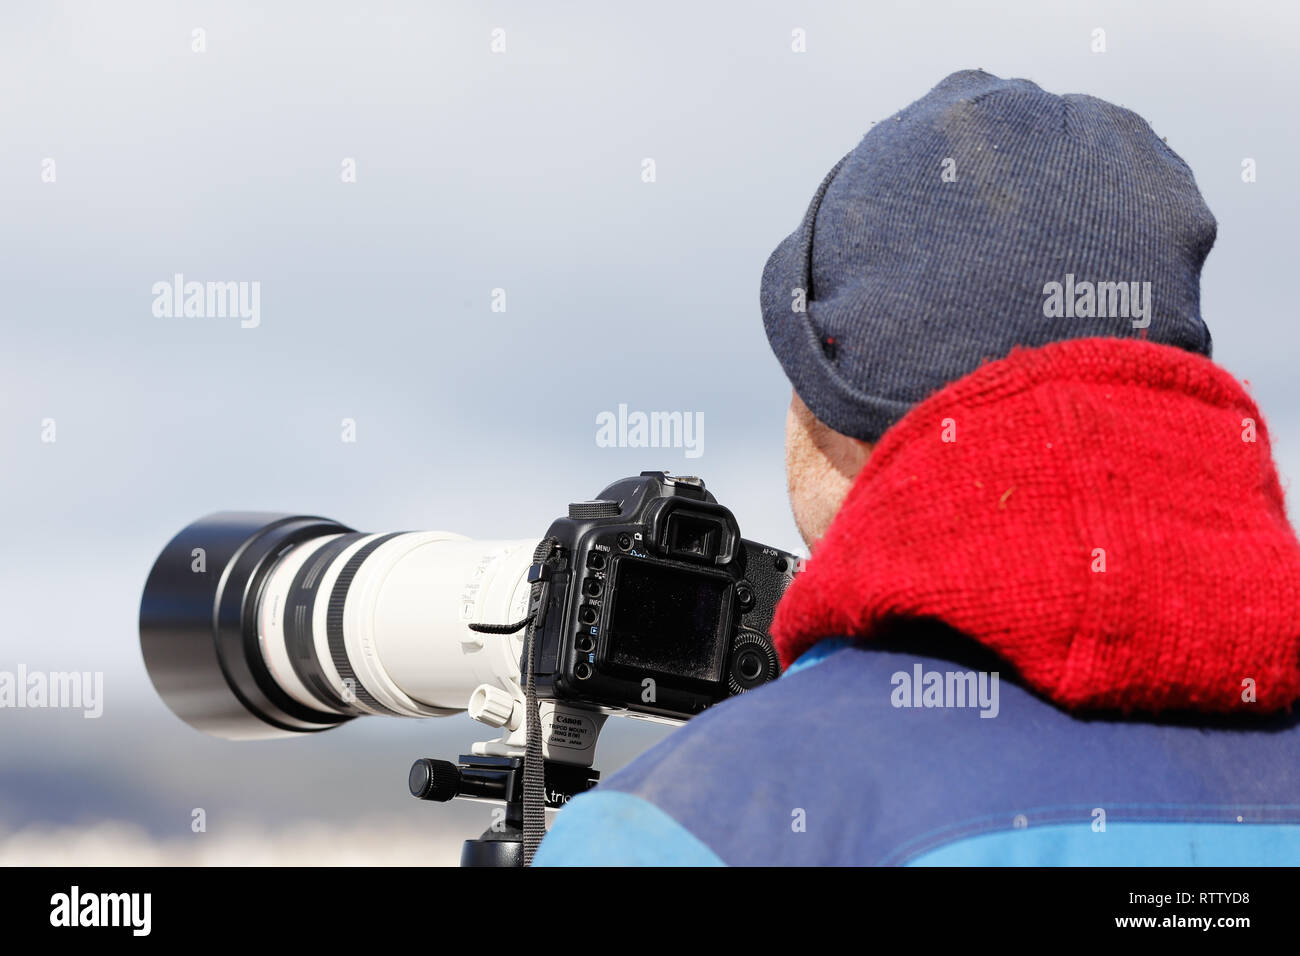 Rannesta, Sweden - March 21, 2015: Rear view of a photographer  with a telephoto lens fitted camera on a tripod. Stock Photo